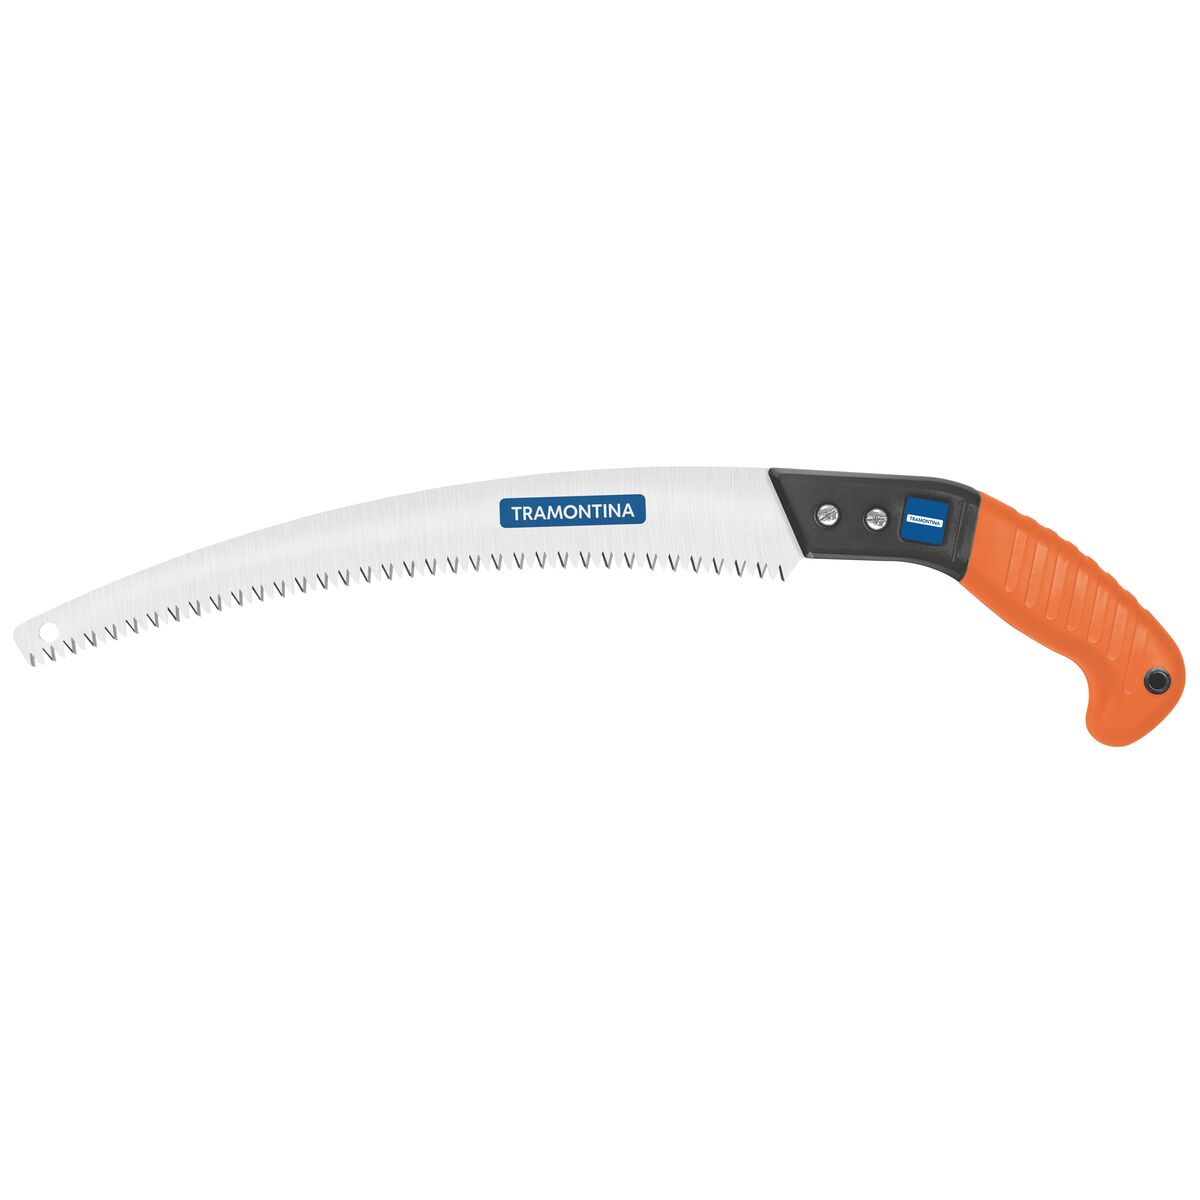 Tramontina 12.5"/320-mm Fixed Metal Pruning Saw with Rubberized Handle